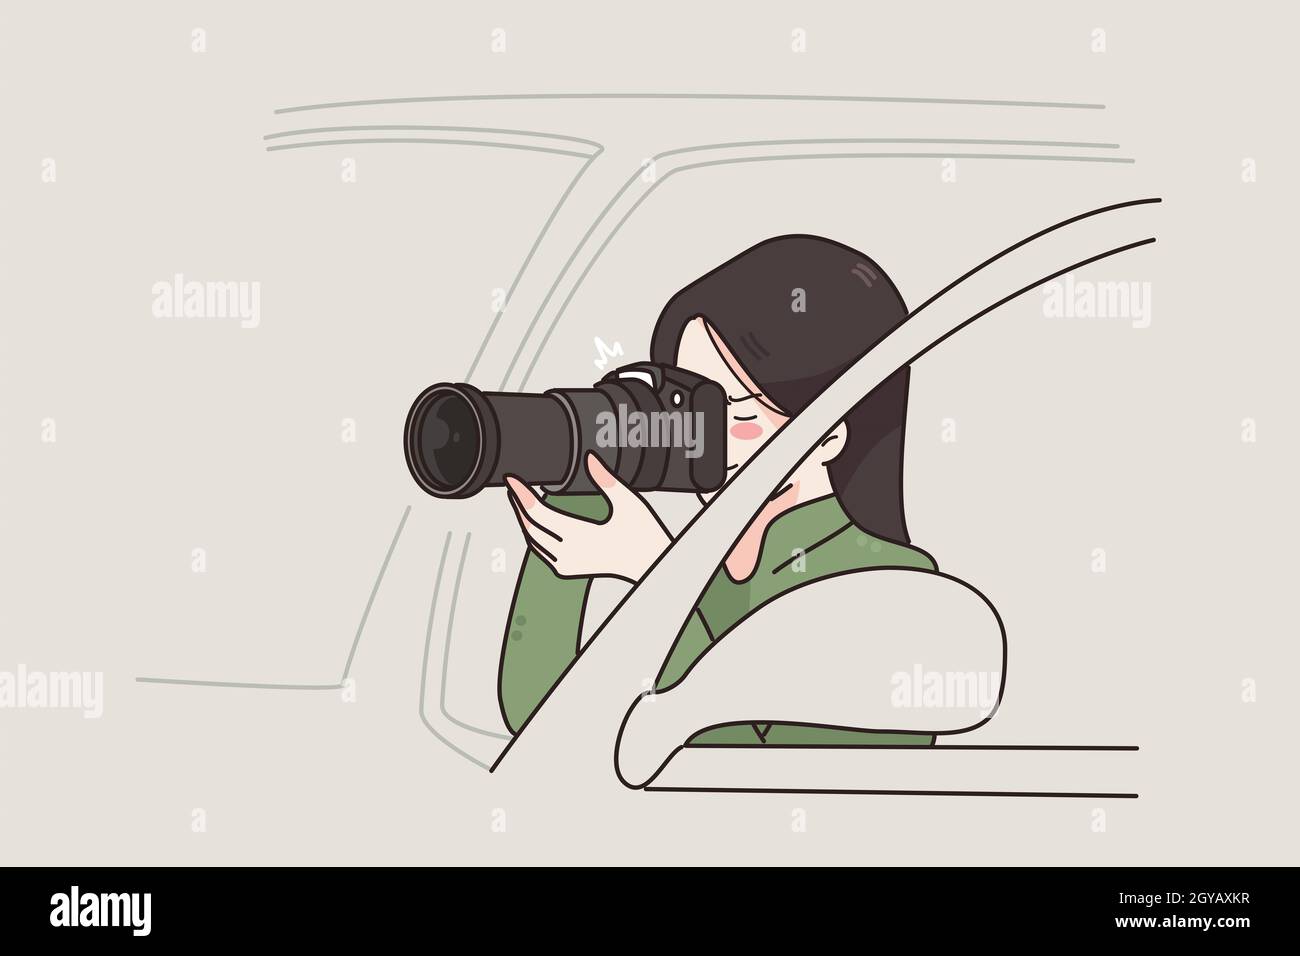 Working as detective of photographer concept. Young woman cartoon character working as Private detective sitting in car with camera spying near car ou Stock Photo